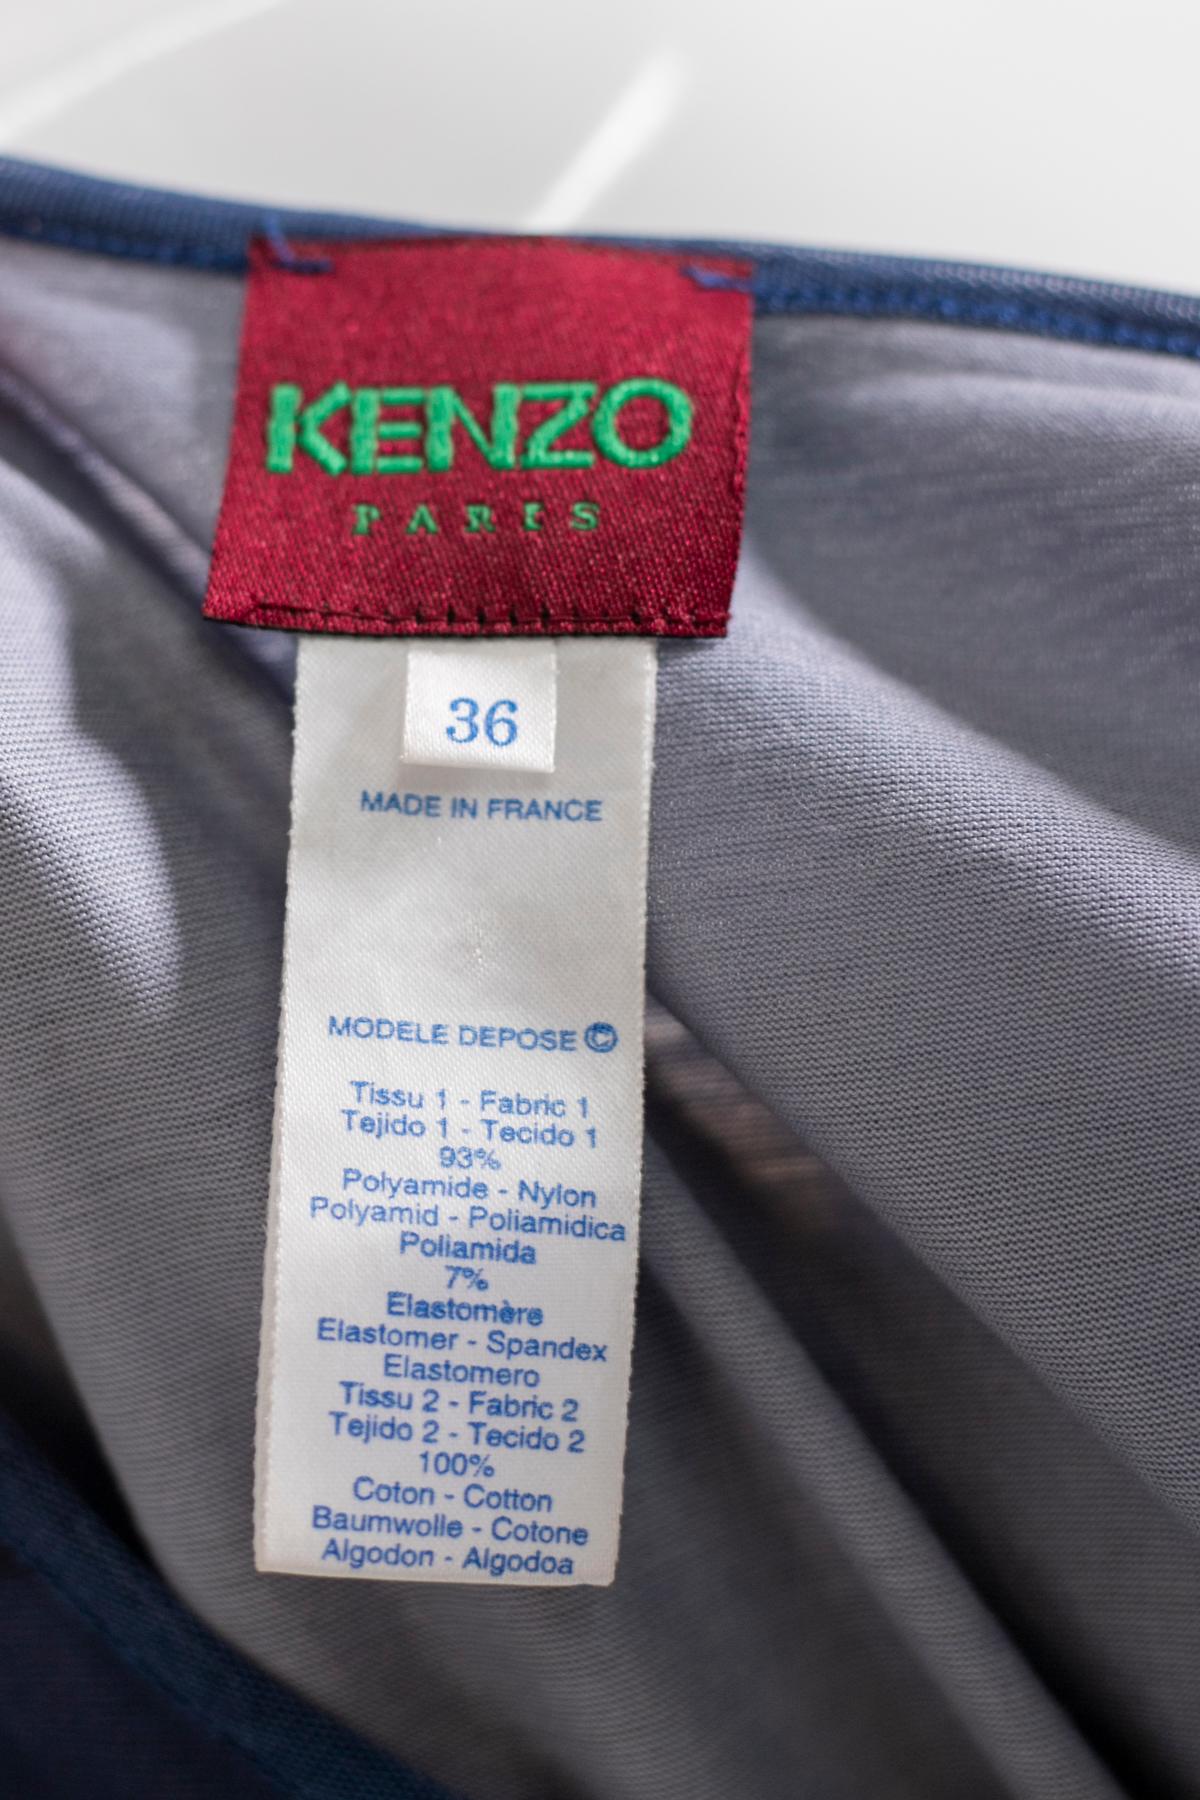 Beautiful vintage dress designed by the great designer Kenzo in the 1990s. Made in France. The dress has the original label.
The dress is below the knee length and is an elegant gift blue colour.
The dress has wide straps with a soft cut, like the